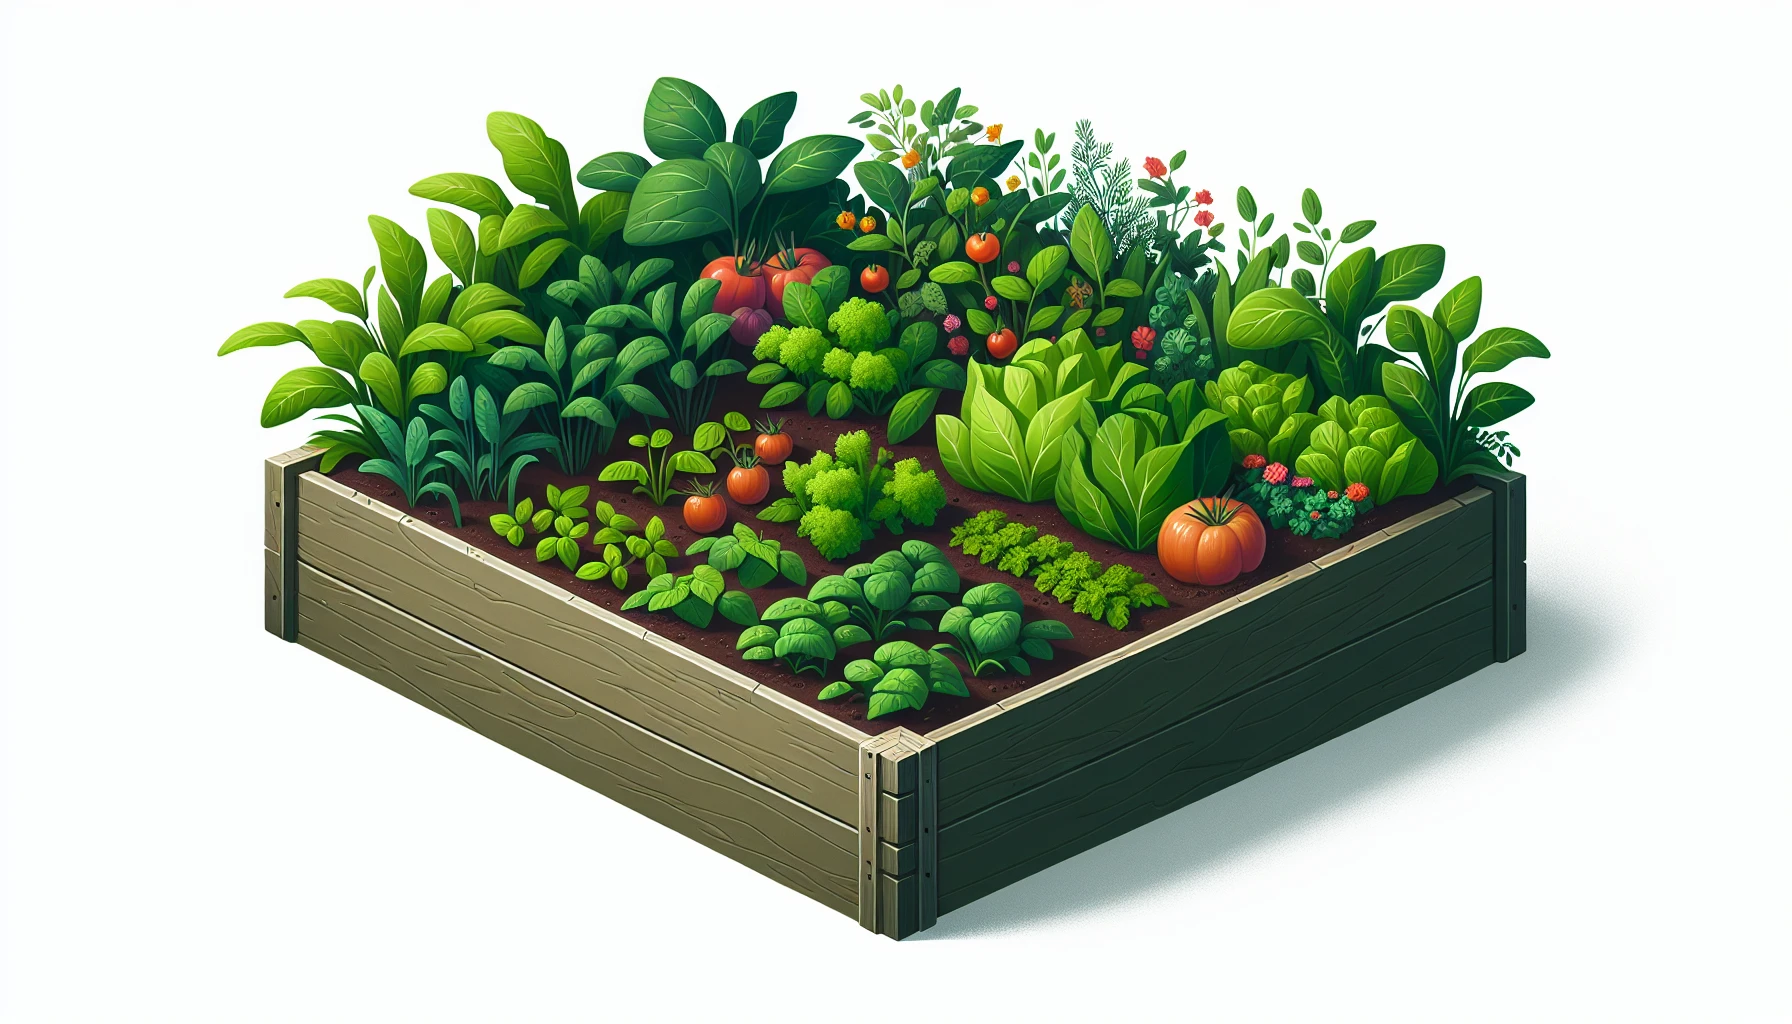 Healthy plants thriving in a 4x4 raised garden bed